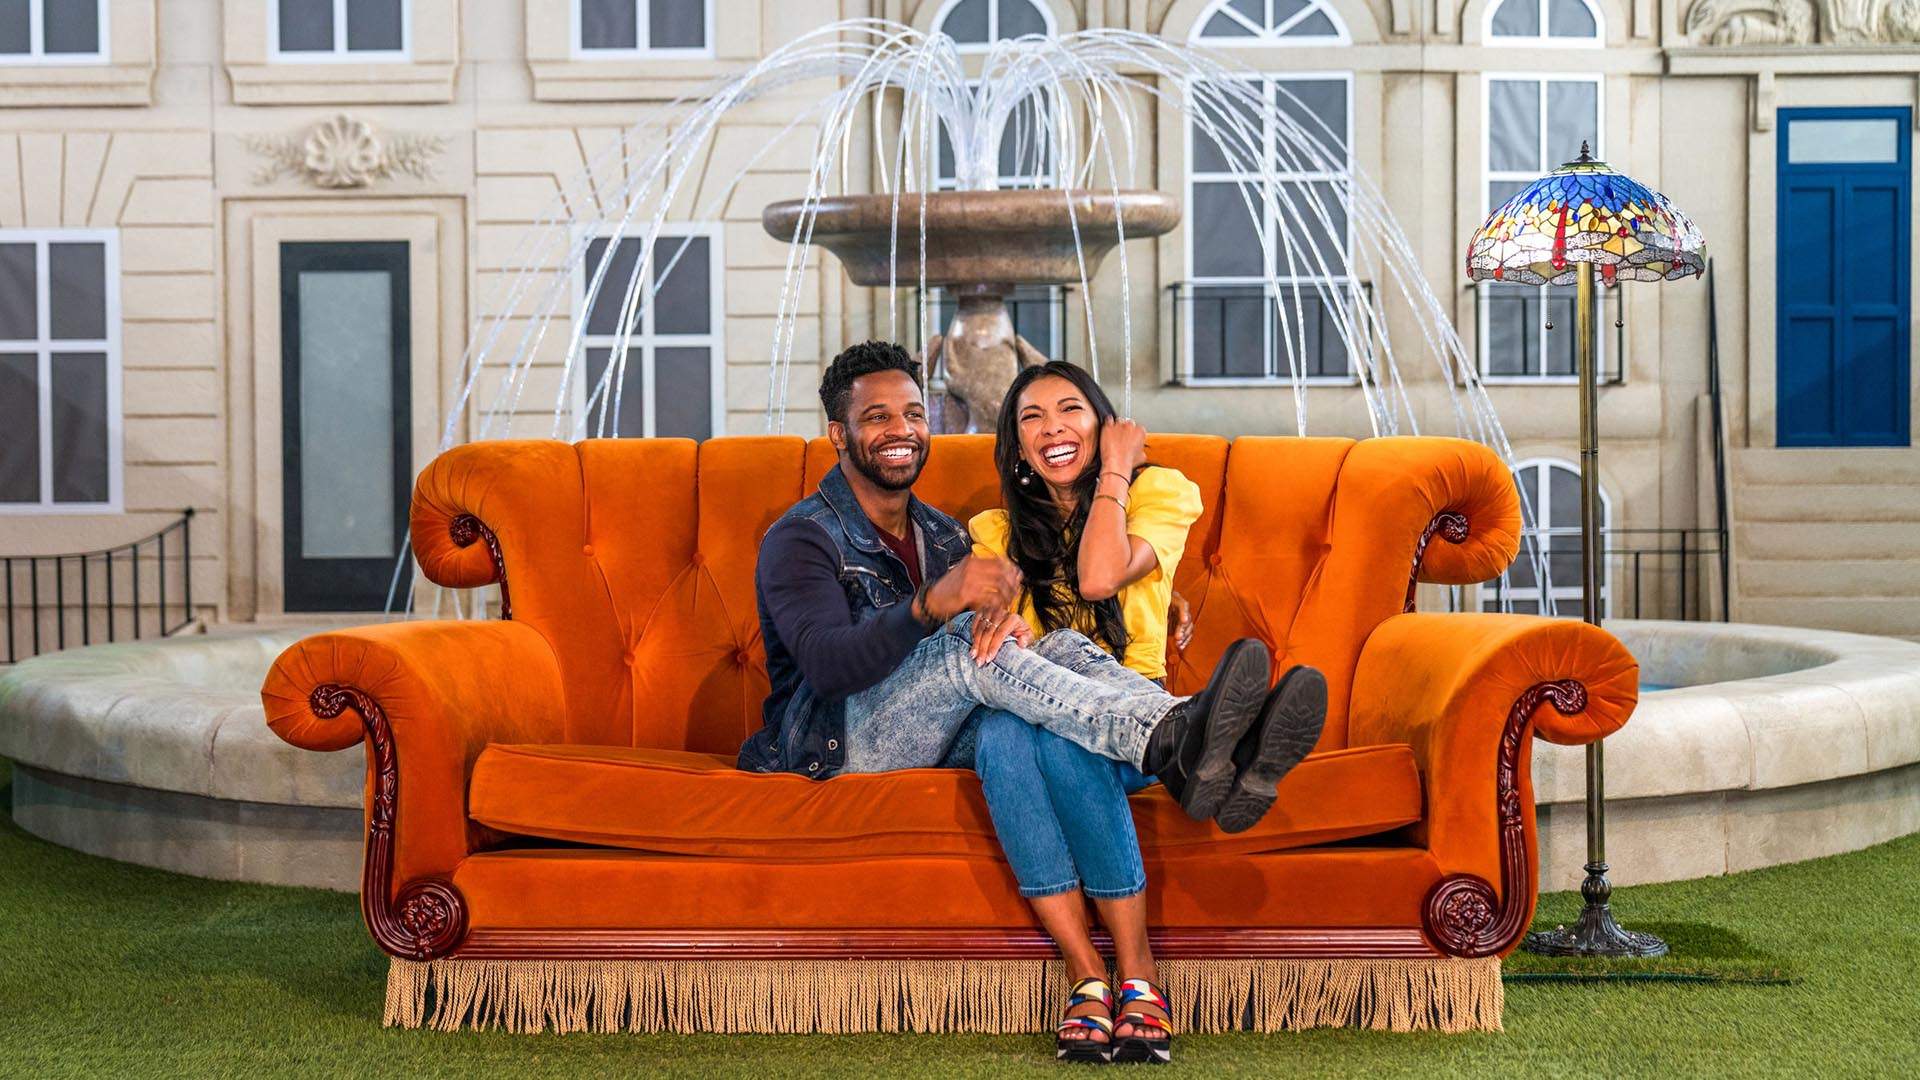 Replicas of Central Perk, That Orange Couch and the 'Friends' Fountain Are Popping Up in Australia